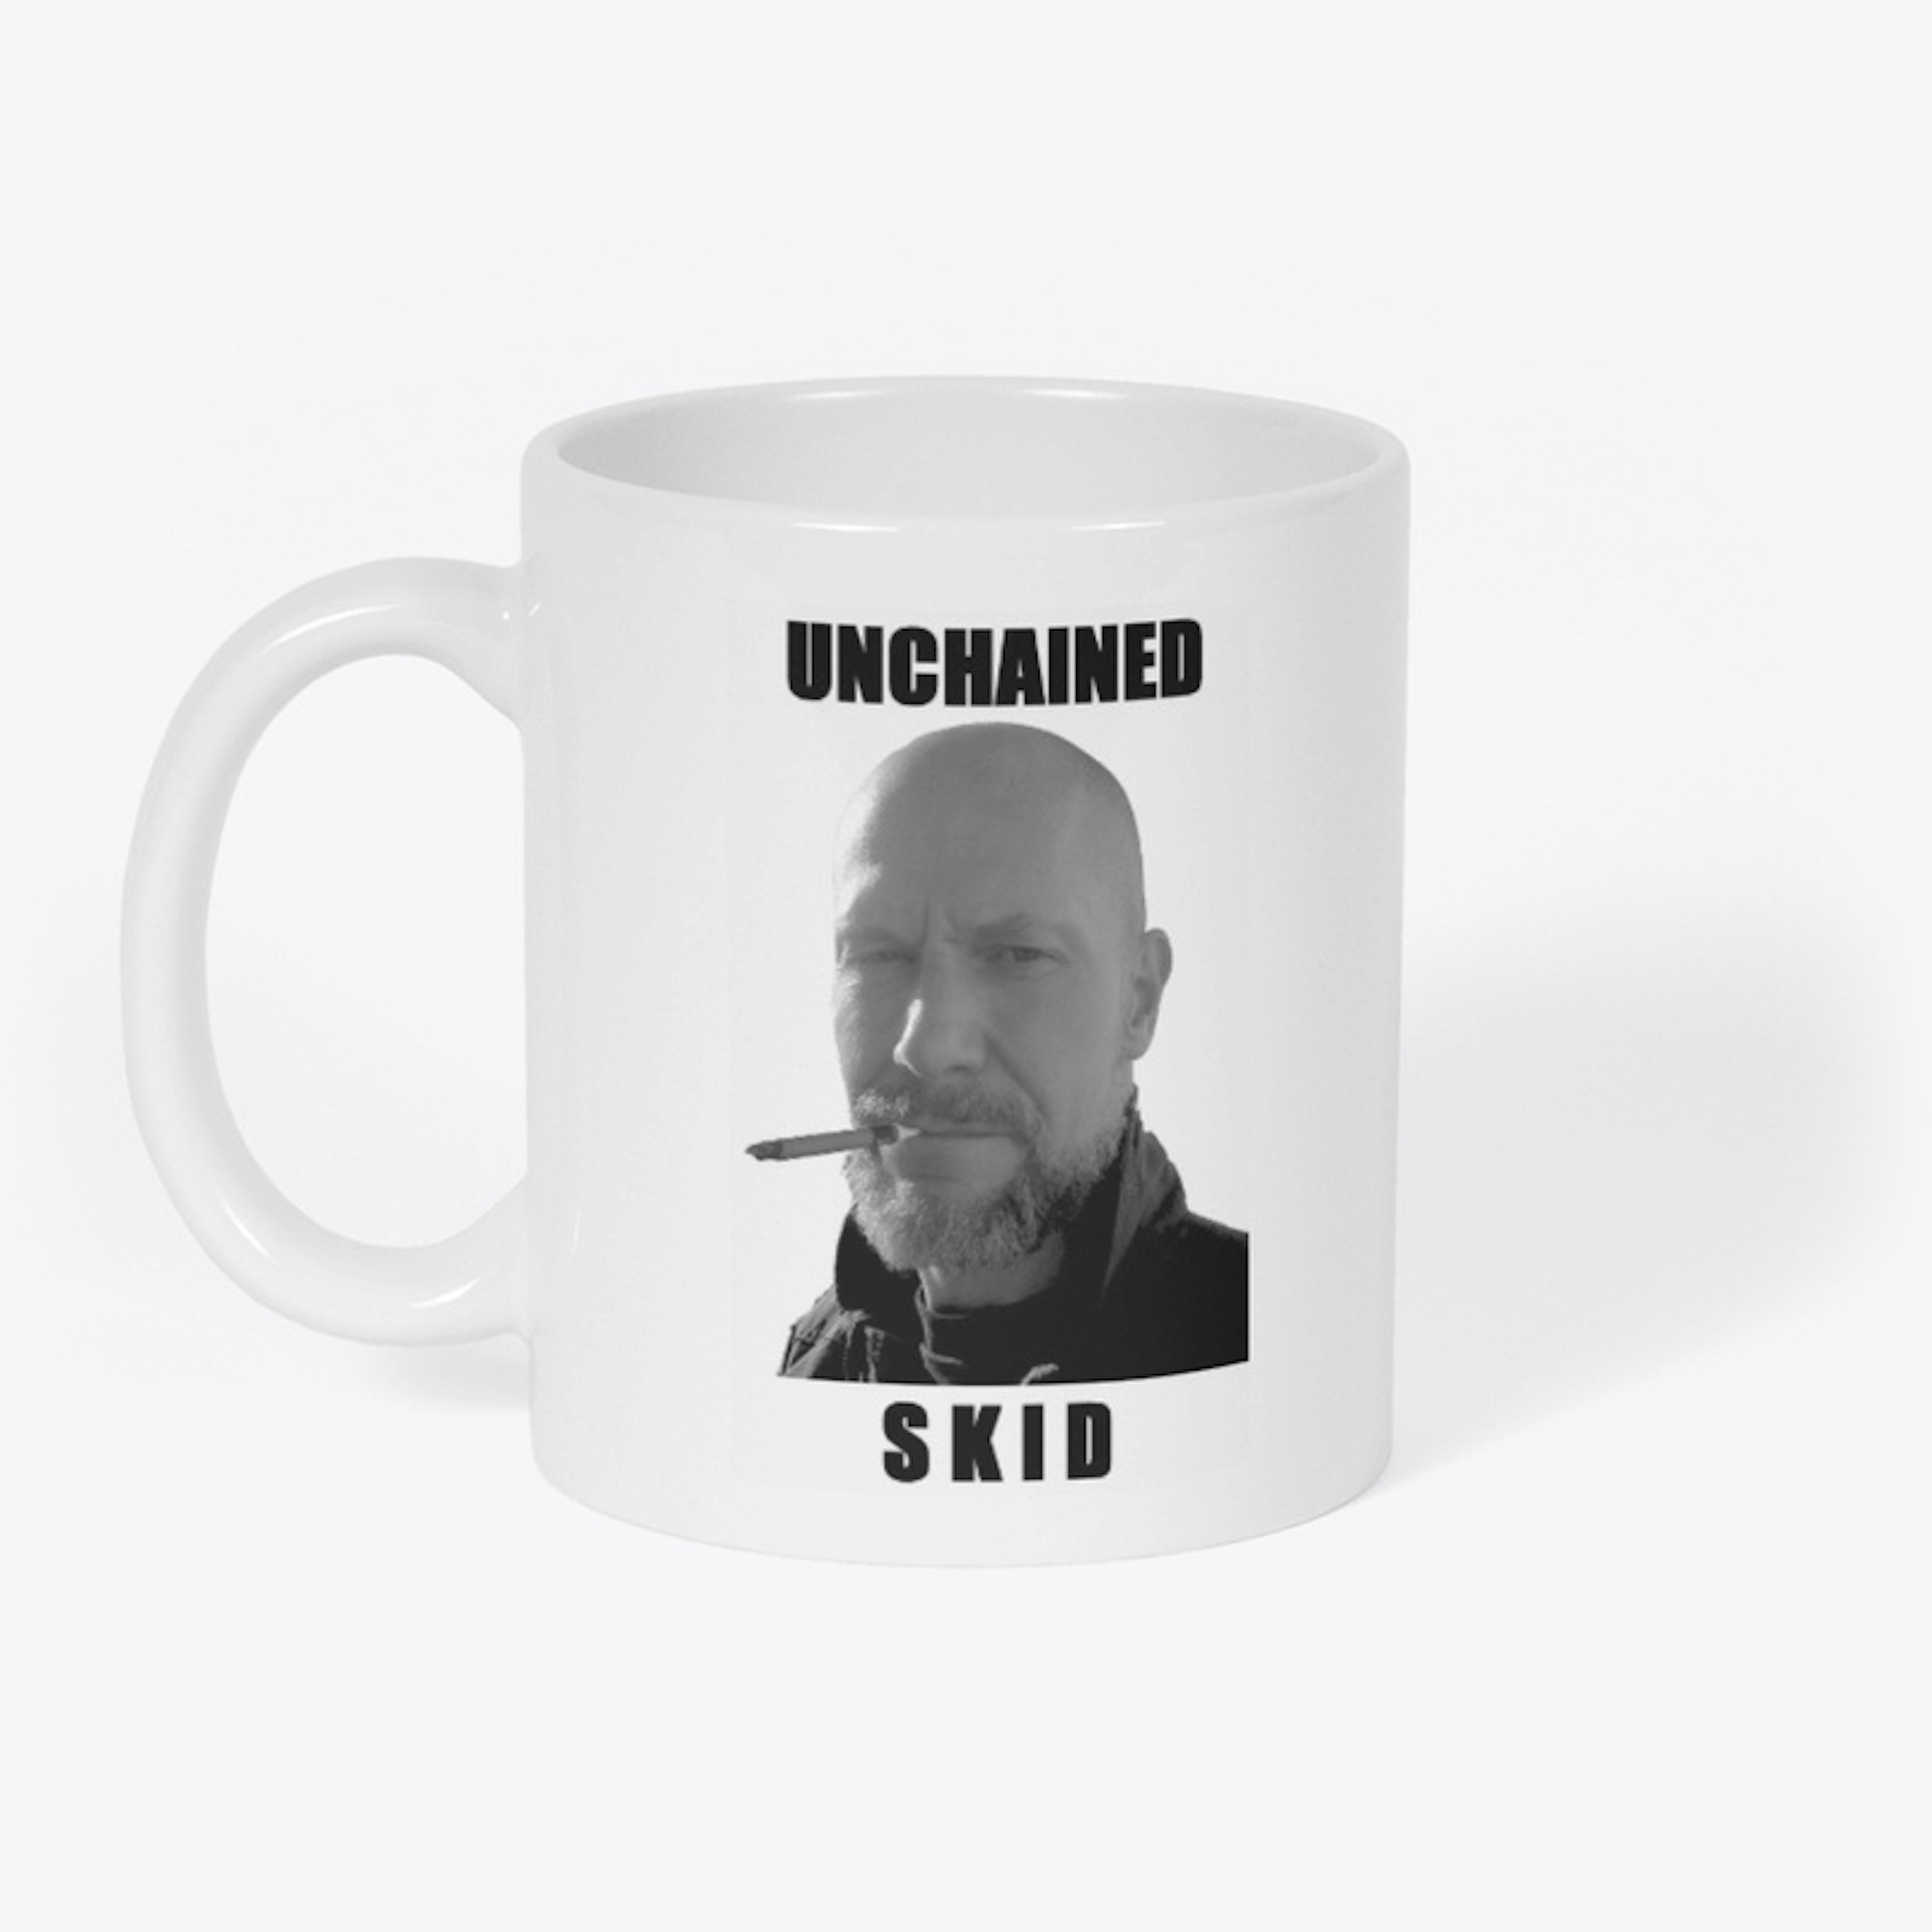 Unchained Skid